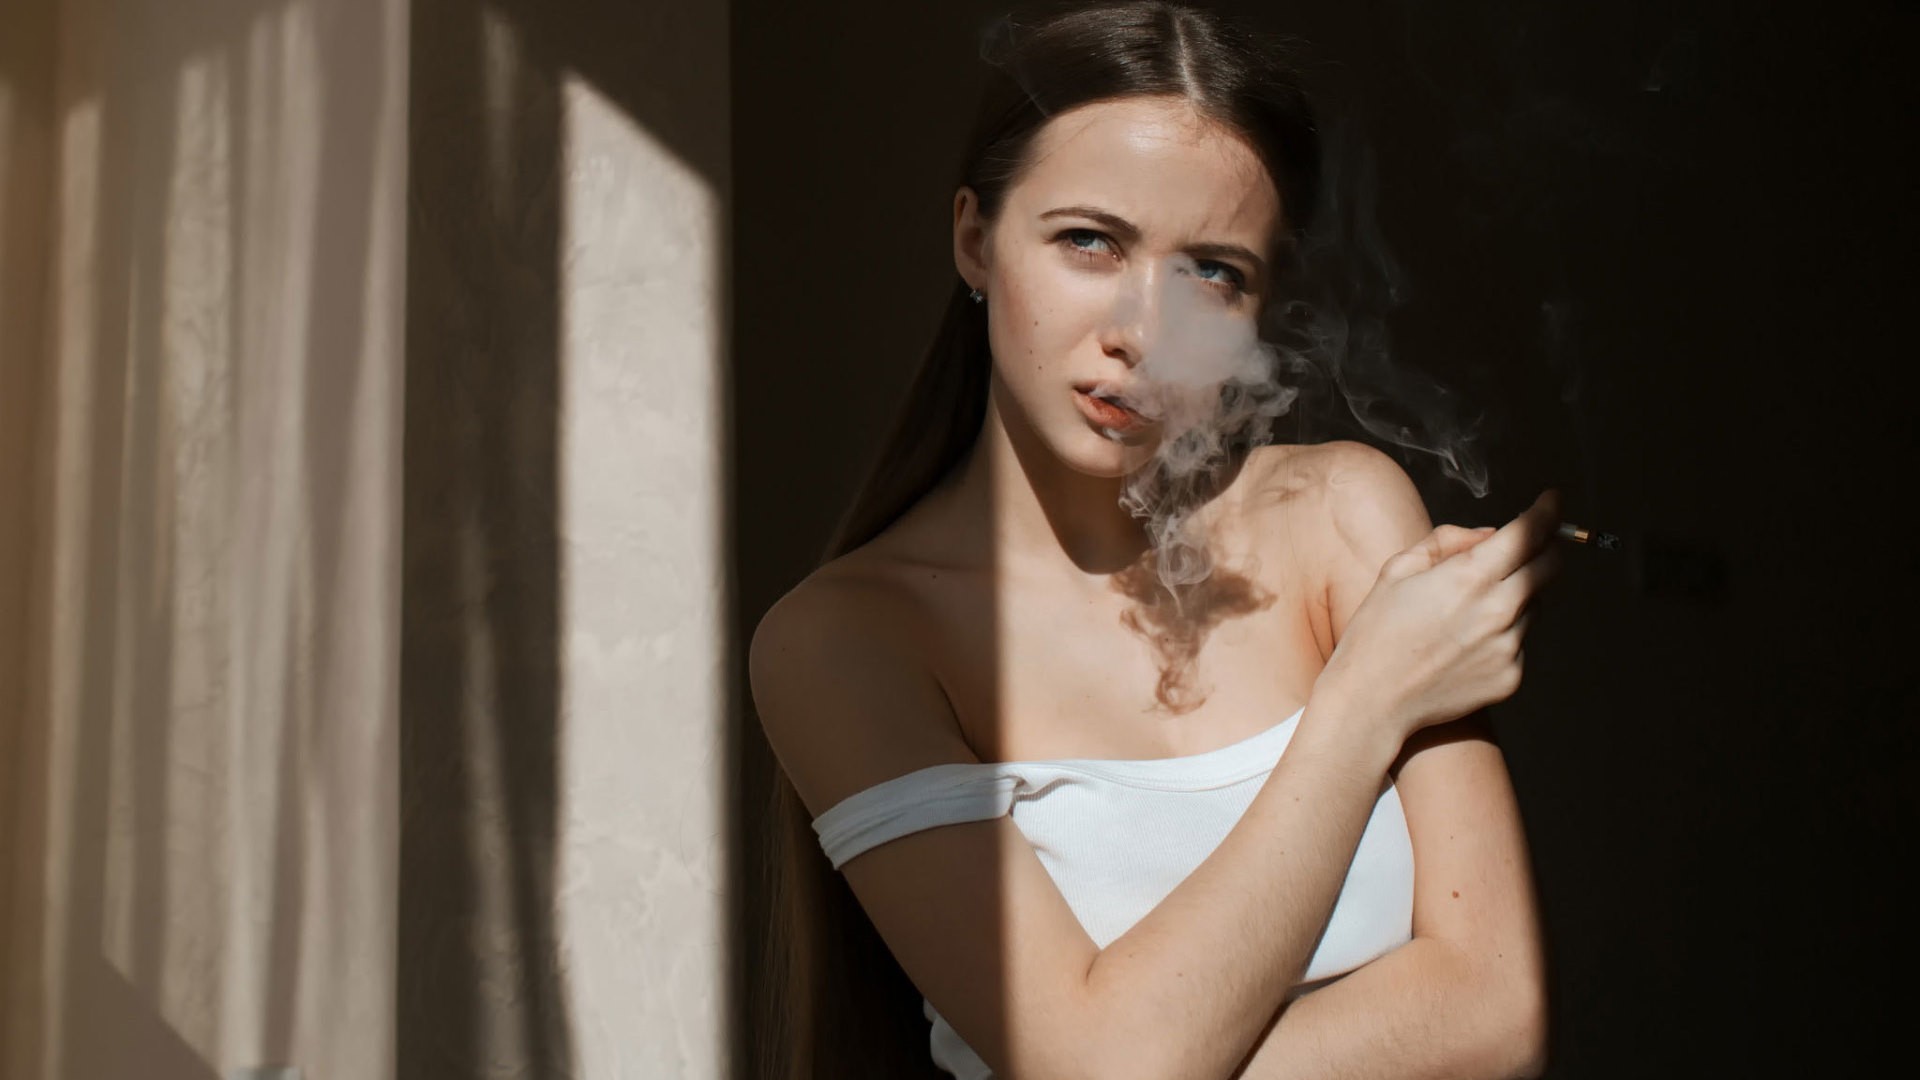 Free photo Girl in a nightie smoking a cigarette.